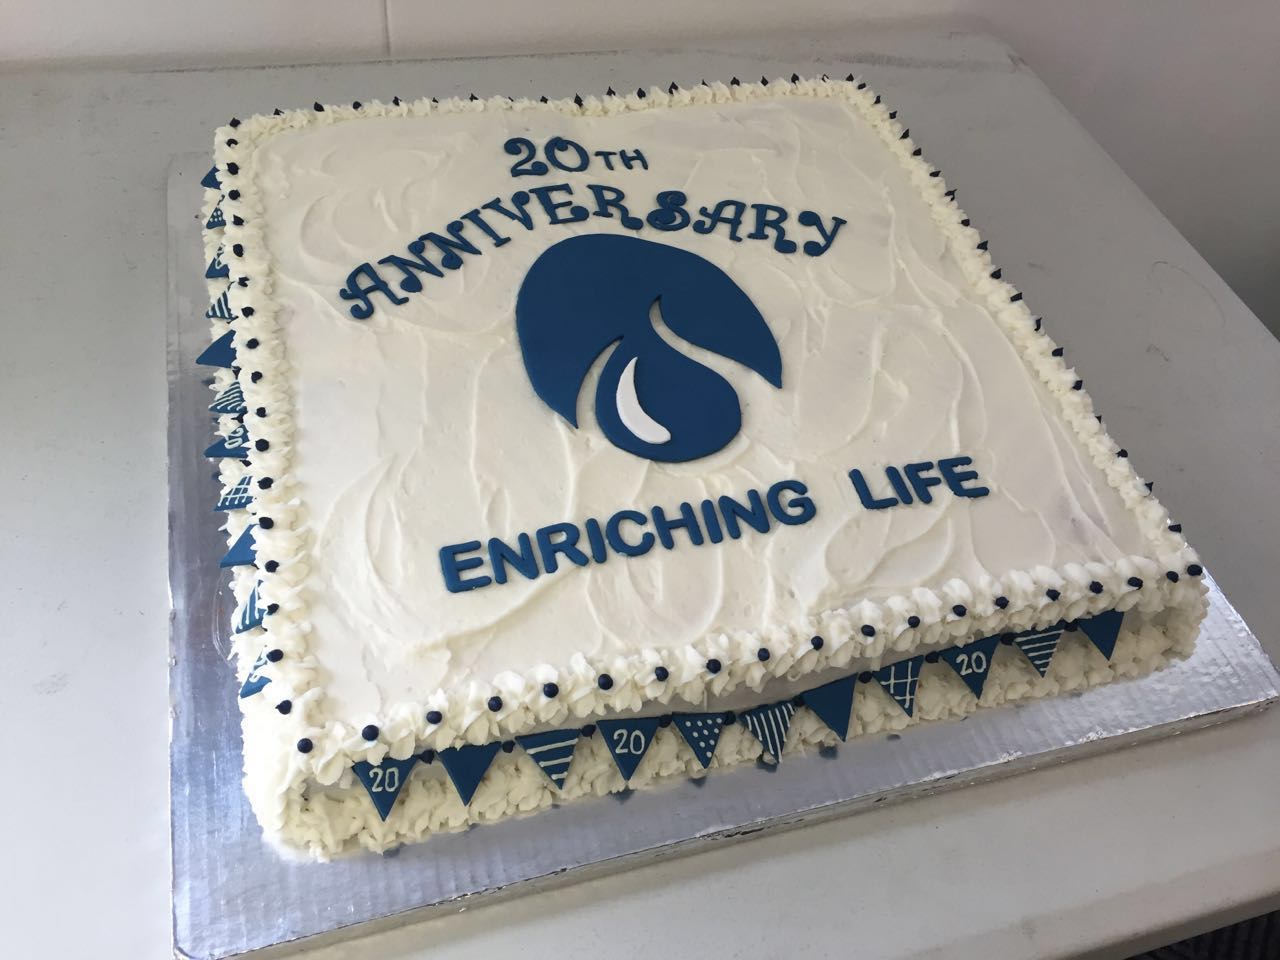 Celebrating 20 Years of Excellence!